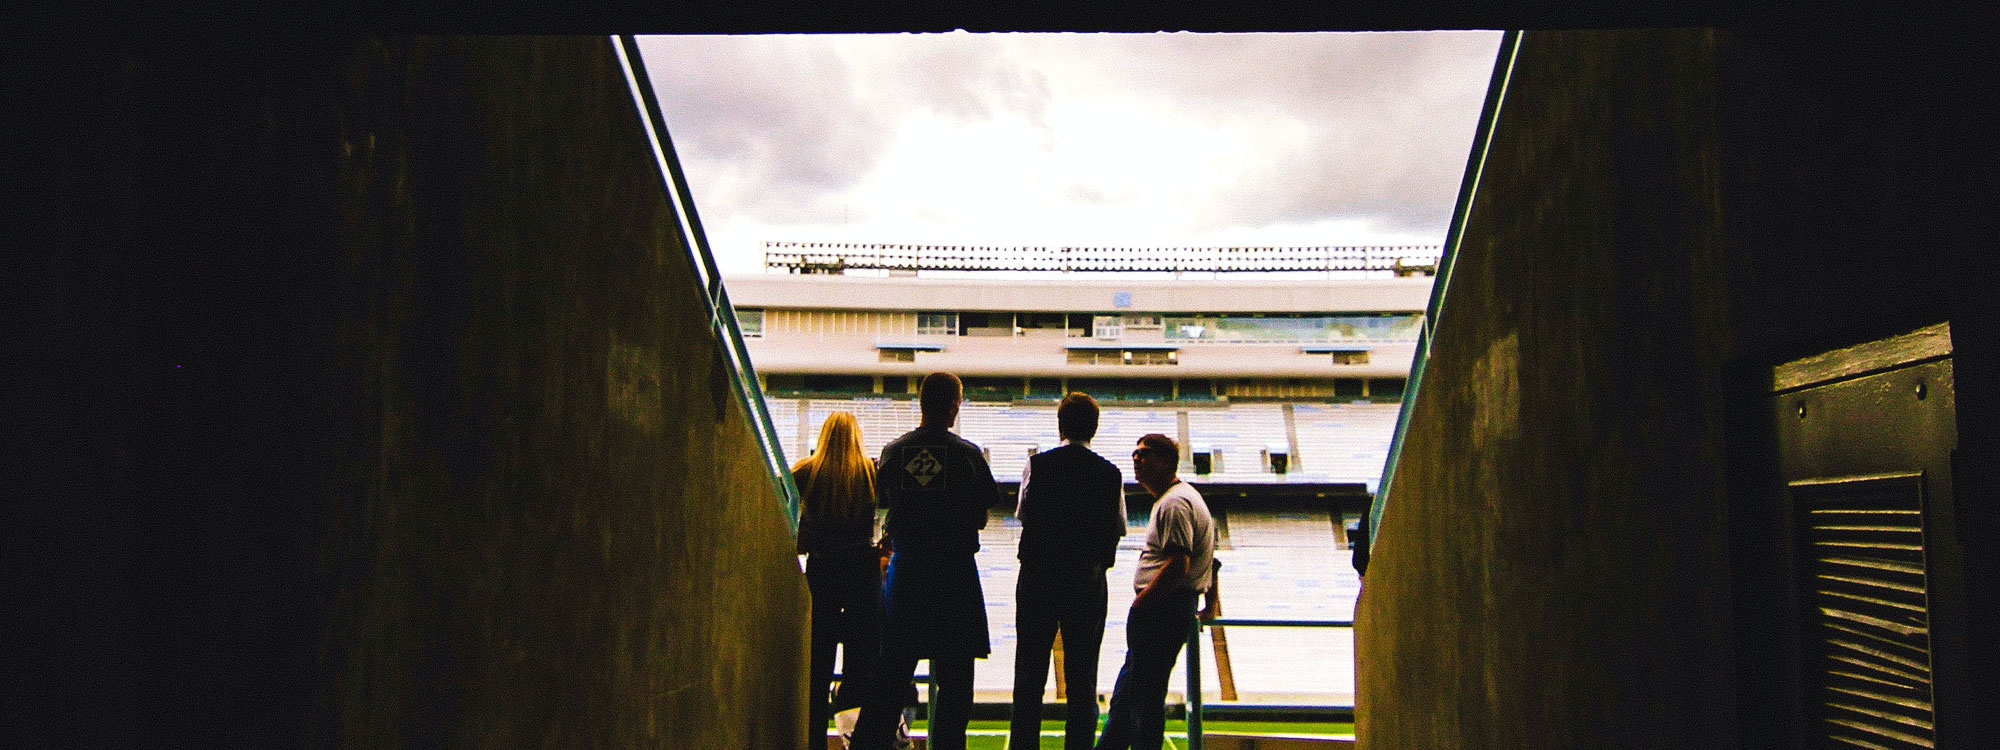 Group of people standing at entrance to a stadium